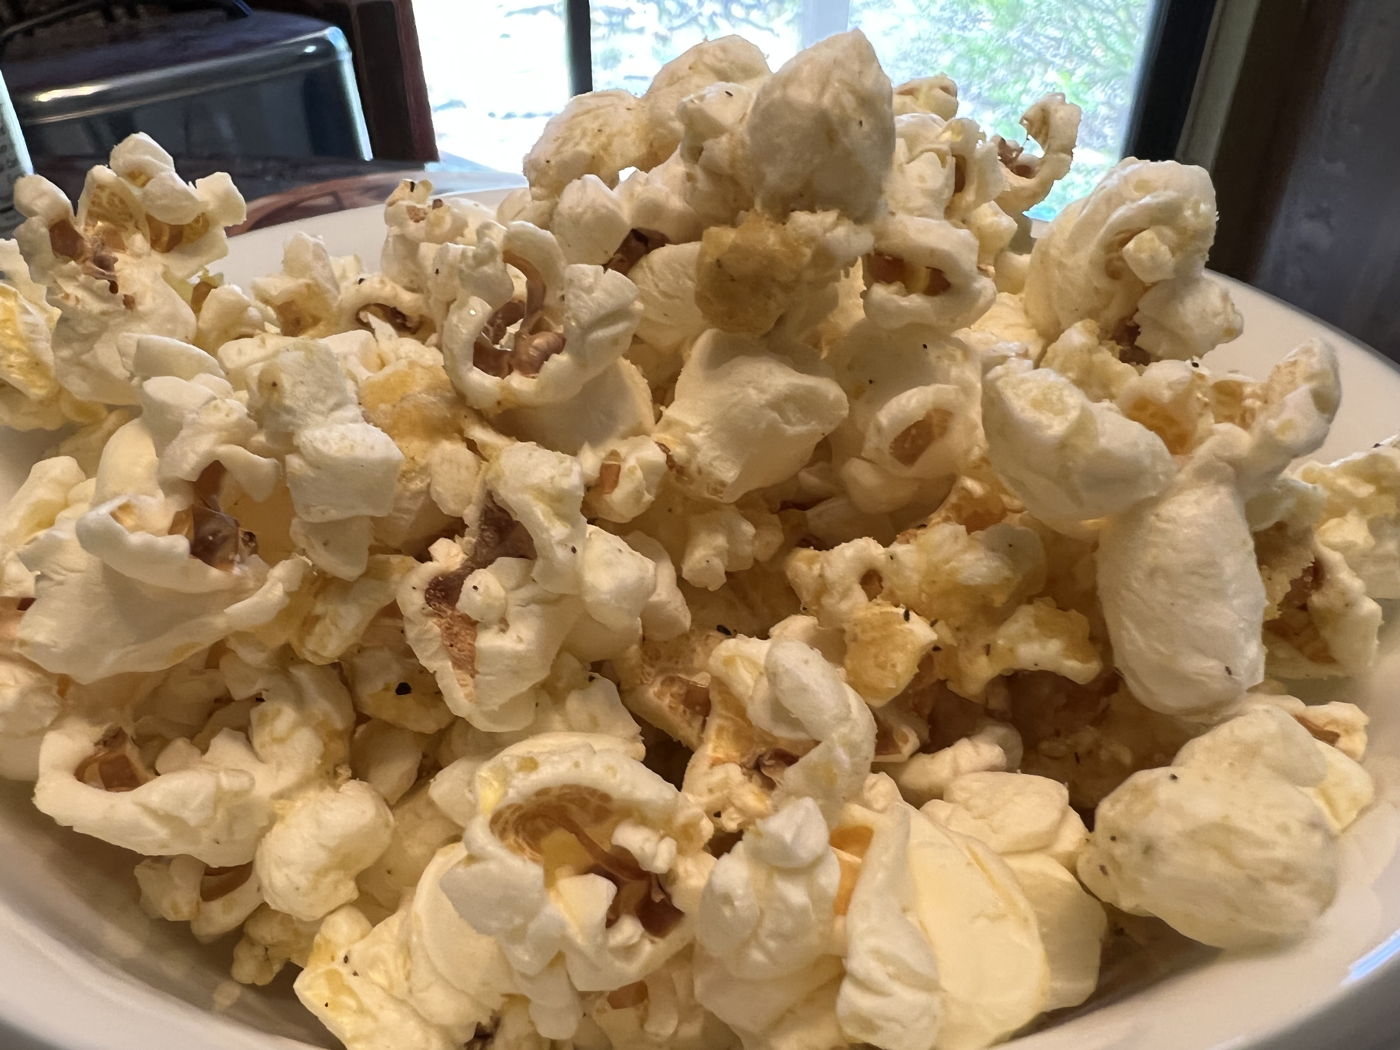 Ranch-dusted popcorn